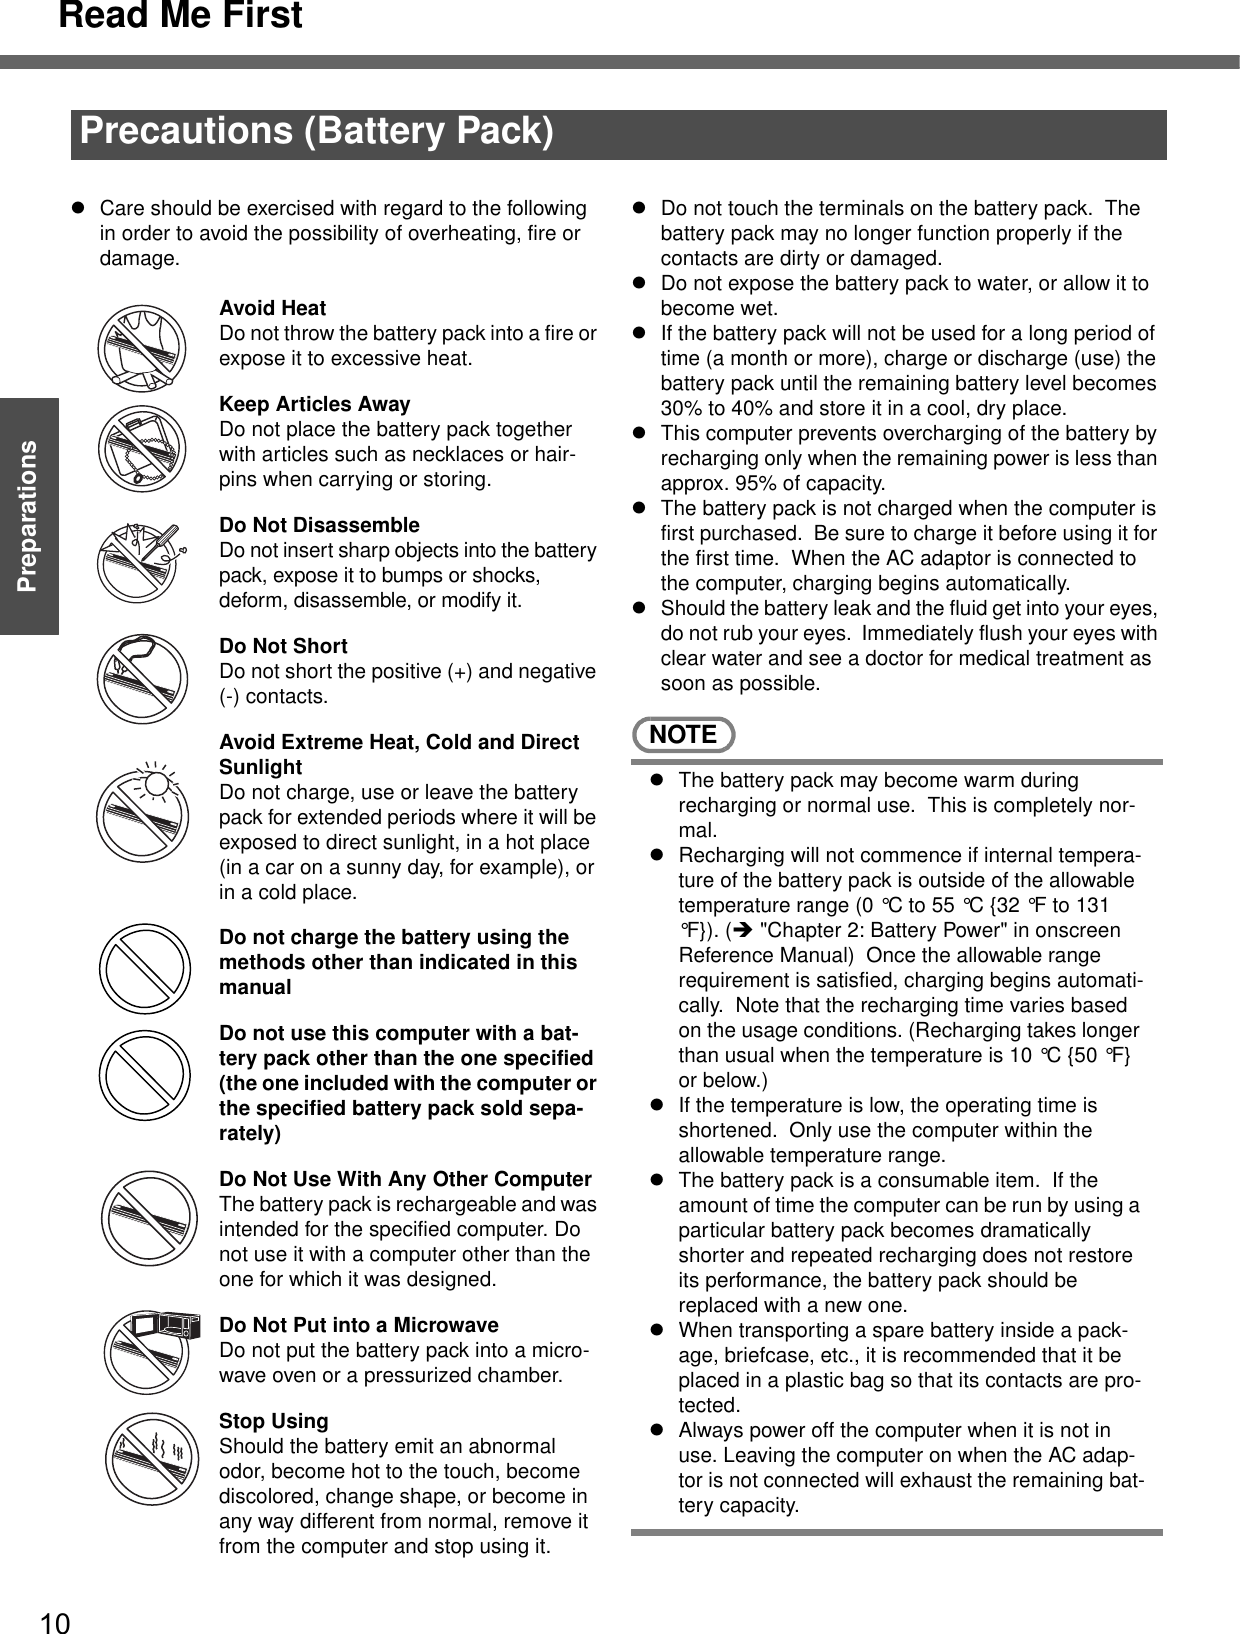 Read Me First10Getting StartedPreparationsPrecautions (Battery Pack)zCare should be exercised with regard to the following in order to avoid the possibility of overheating, fire or damage.Avoid HeatDo not throw the battery pack into a fire or expose it to excessive heat.Keep Articles AwayDo not place the battery pack together with articles such as necklaces or hair-pins when carrying or storing.Do Not DisassembleDo not insert sharp objects into the battery pack, expose it to bumps or shocks, deform, disassemble, or modify it.Do Not ShortDo not short the positive (+) and negative (-) contacts.Avoid Extreme Heat, Cold and Direct SunlightDo not charge, use or leave the battery pack for extended periods where it will be exposed to direct sunlight, in a hot place (in a car on a sunny day, for example), or in a cold place.Do not charge the battery using the methods other than indicated in this manualDo not use this computer with a bat-tery pack other than the one specified (the one included with the computer or the specified battery pack sold sepa-rately)Do Not Use With Any Other ComputerThe battery pack is rechargeable and was intended for the specified computer. Do not use it with a computer other than the one for which it was designed.Do Not Put into a MicrowaveDo not put the battery pack into a micro-wave oven or a pressurized chamber.Stop UsingShould the battery emit an abnormal odor, become hot to the touch, become discolored, change shape, or become in any way different from normal, remove it from the computer and stop using it.zDo not touch the terminals on the battery pack.  The battery pack may no longer function properly if the contacts are dirty or damaged.zDo not expose the battery pack to water, or allow it to become wet.zIf the battery pack will not be used for a long period of time (a month or more), charge or discharge (use) the battery pack until the remaining battery level becomes 30% to 40% and store it in a cool, dry place.zThis computer prevents overcharging of the battery by recharging only when the remaining power is less than approx. 95% of capacity.zThe battery pack is not charged when the computer is first purchased.  Be sure to charge it before using it for the first time.  When the AC adaptor is connected to the computer, charging begins automatically.zShould the battery leak and the fluid get into your eyes, do not rub your eyes.  Immediately flush your eyes with clear water and see a doctor for medical treatment as soon as possible.NOTEzThe battery pack may become warm during recharging or normal use.  This is completely nor-mal.zRecharging will not commence if internal tempera-ture of the battery pack is outside of the allowable temperature range (0 °C to 55 °C {32 °F to 131 °F}). (Î &quot;Chapter 2: Battery Power&quot; in onscreen Reference Manual)  Once the allowable range requirement is satisfied, charging begins automati-cally.  Note that the recharging time varies based on the usage conditions. (Recharging takes longer than usual when the temperature is 10 °C {50 °F} or below.)zIf the temperature is low, the operating time is shortened.  Only use the computer within the allowable temperature range.zThe battery pack is a consumable item.  If the amount of time the computer can be run by using a particular battery pack becomes dramatically shorter and repeated recharging does not restore its performance, the battery pack should be replaced with a new one.  zWhen transporting a spare battery inside a pack-age, briefcase, etc., it is recommended that it be placed in a plastic bag so that its contacts are pro-tected.zAlways power off the computer when it is not in use. Leaving the computer on when the AC adap-tor is not connected will exhaust the remaining bat-tery capacity.